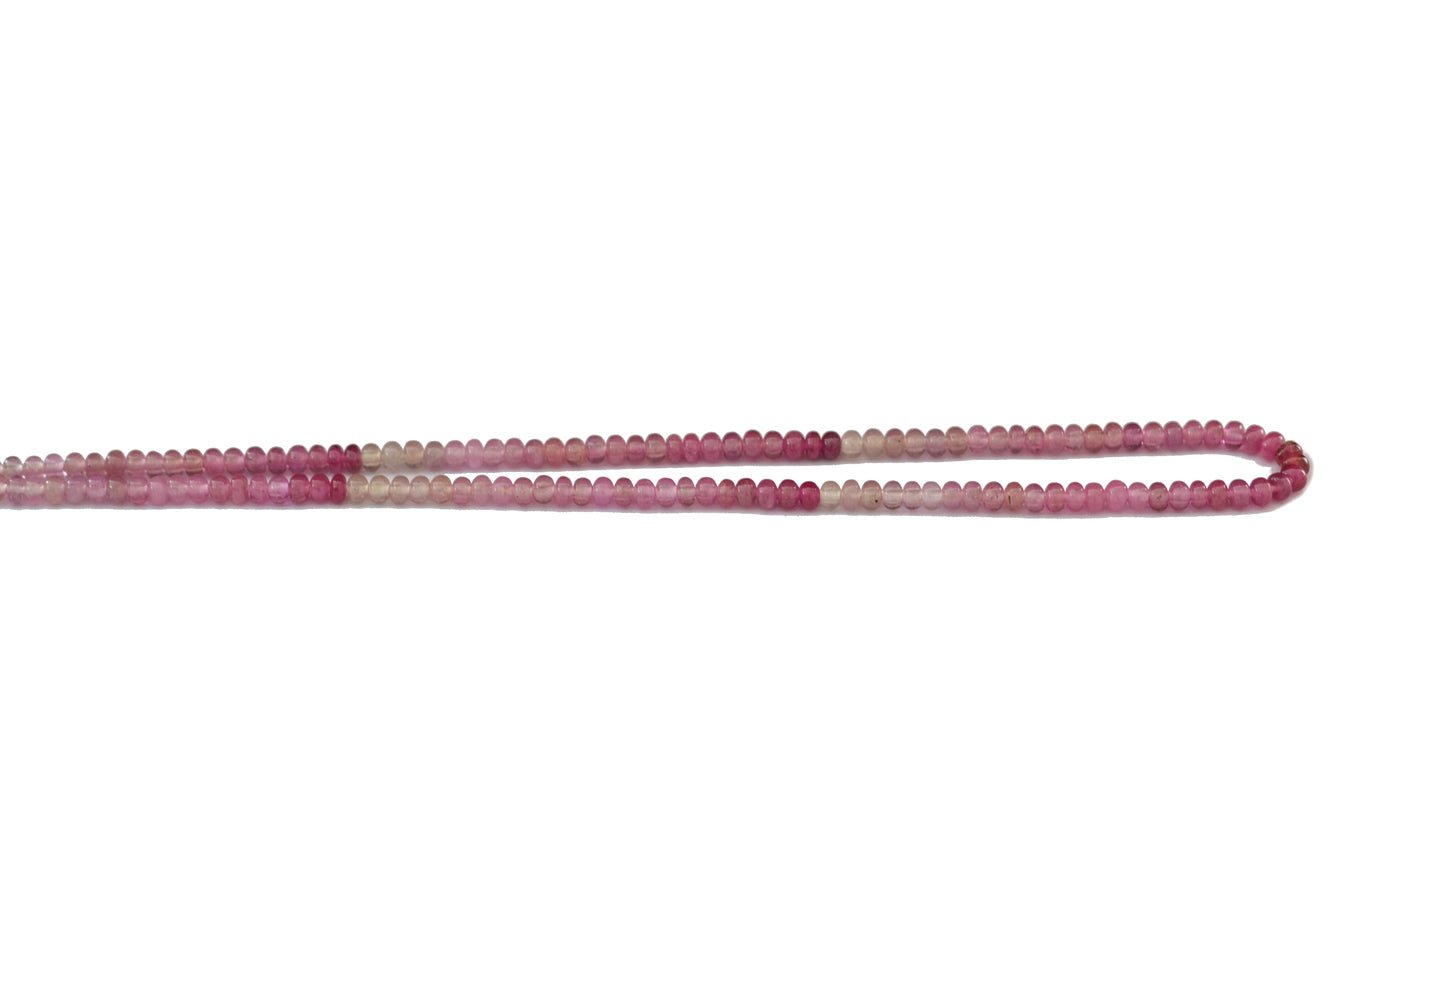 Shaded Pink Sapphire Rondelle Smooth Beads